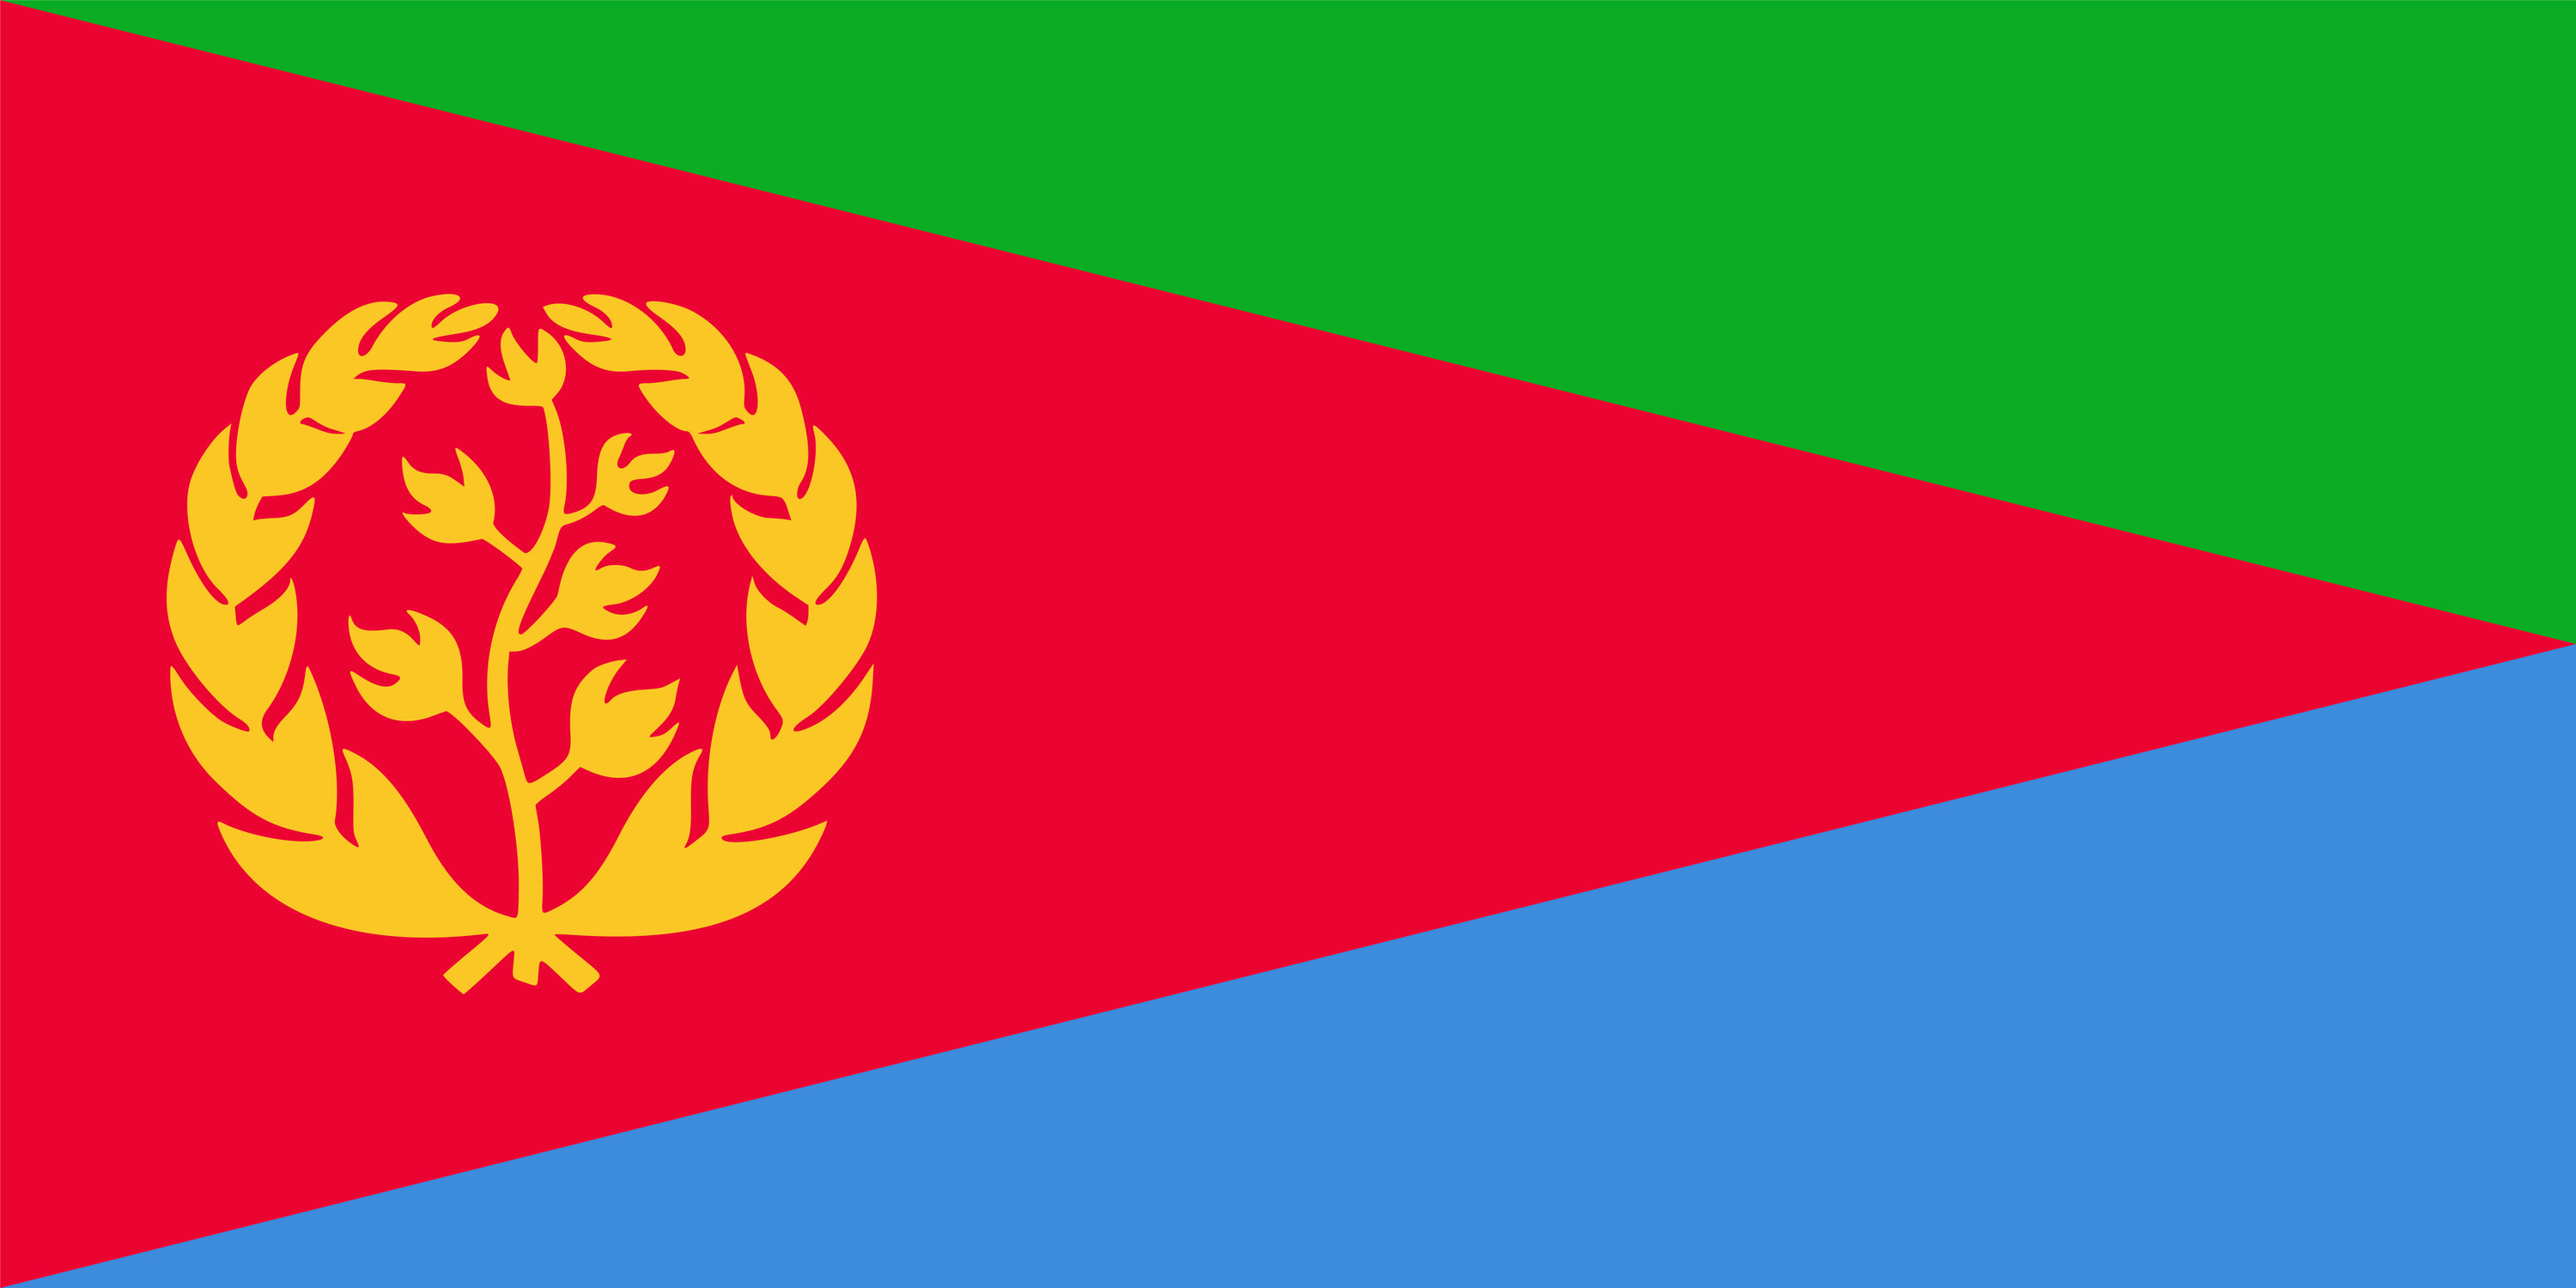 Flag of Eritrea, triangles of green, red, and blue and a yellow emblem off-center toward the hoist